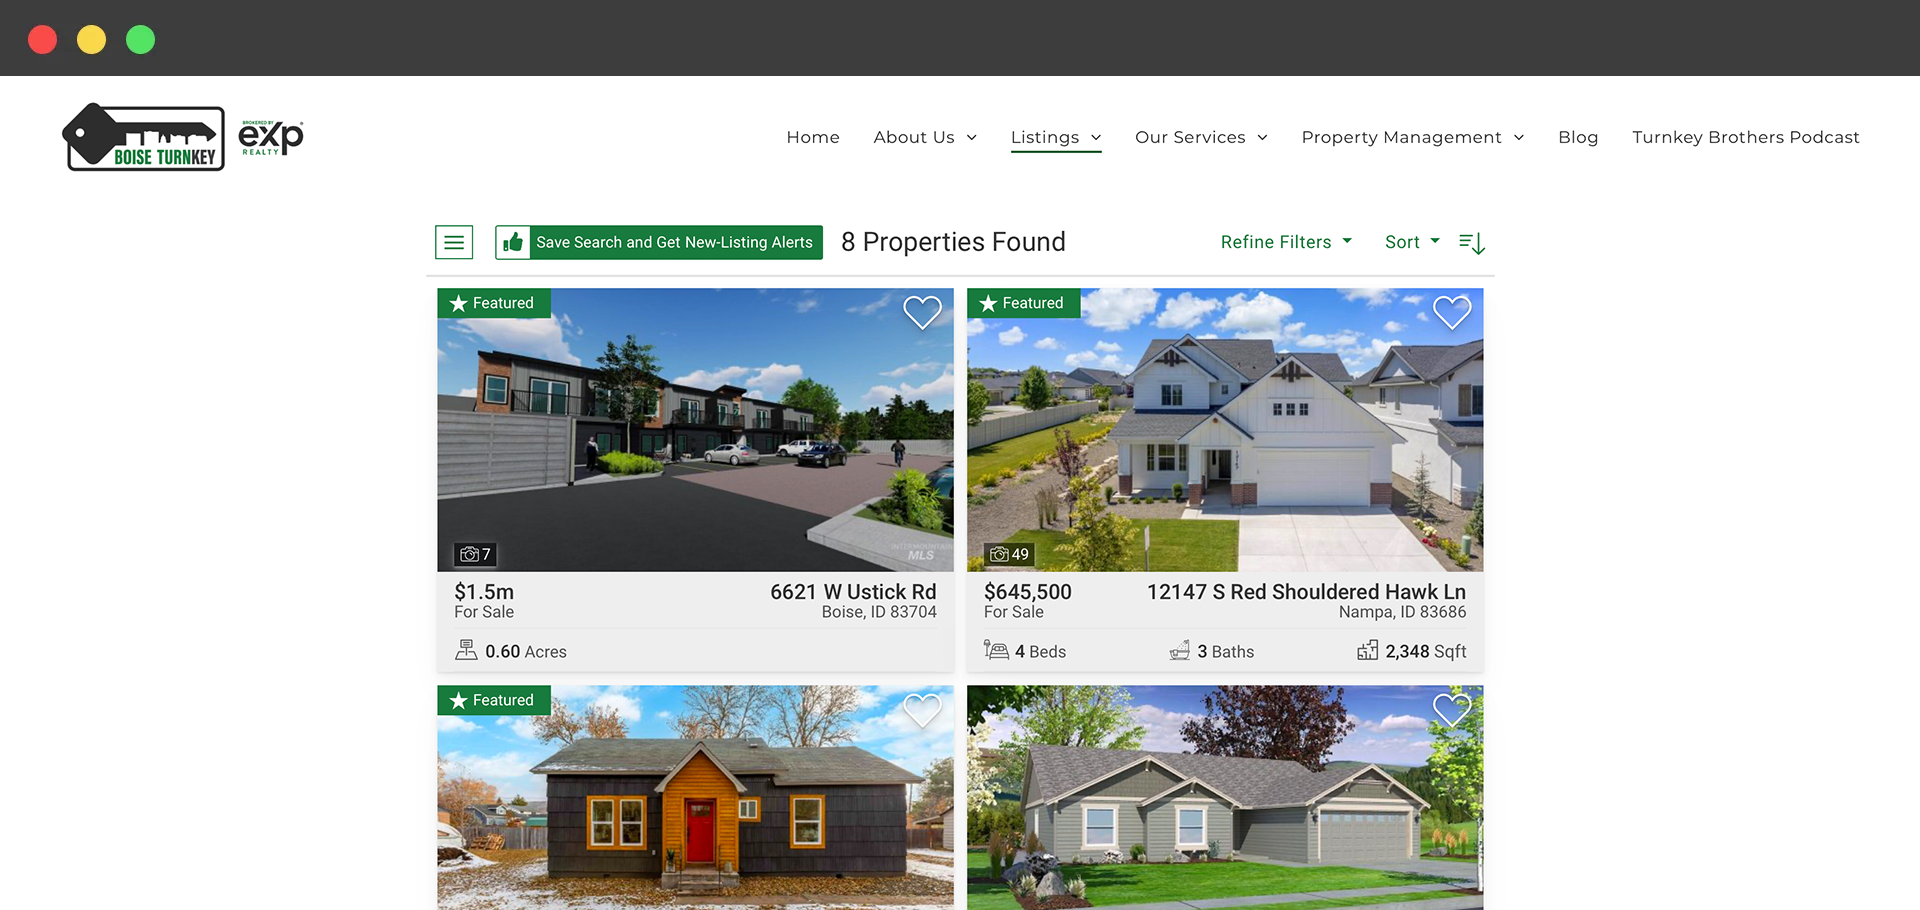 A screenshot of a website showing houses for sale.